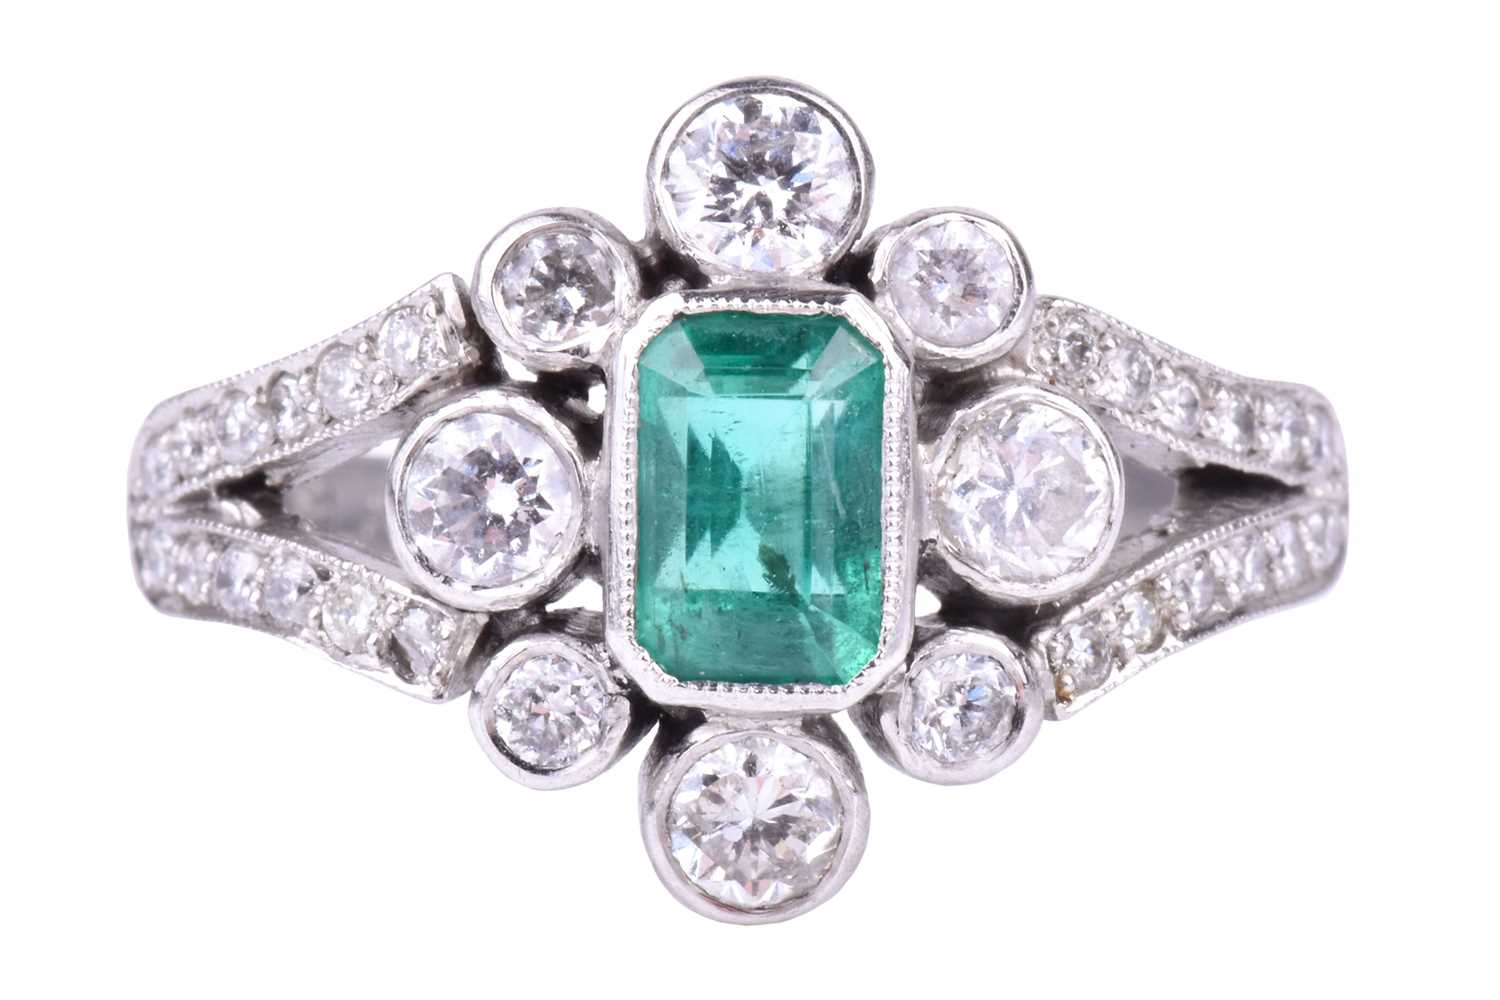 A platinum, diamond, and emerald ringcentred with an emerald-cut emerald of approximately 0.70